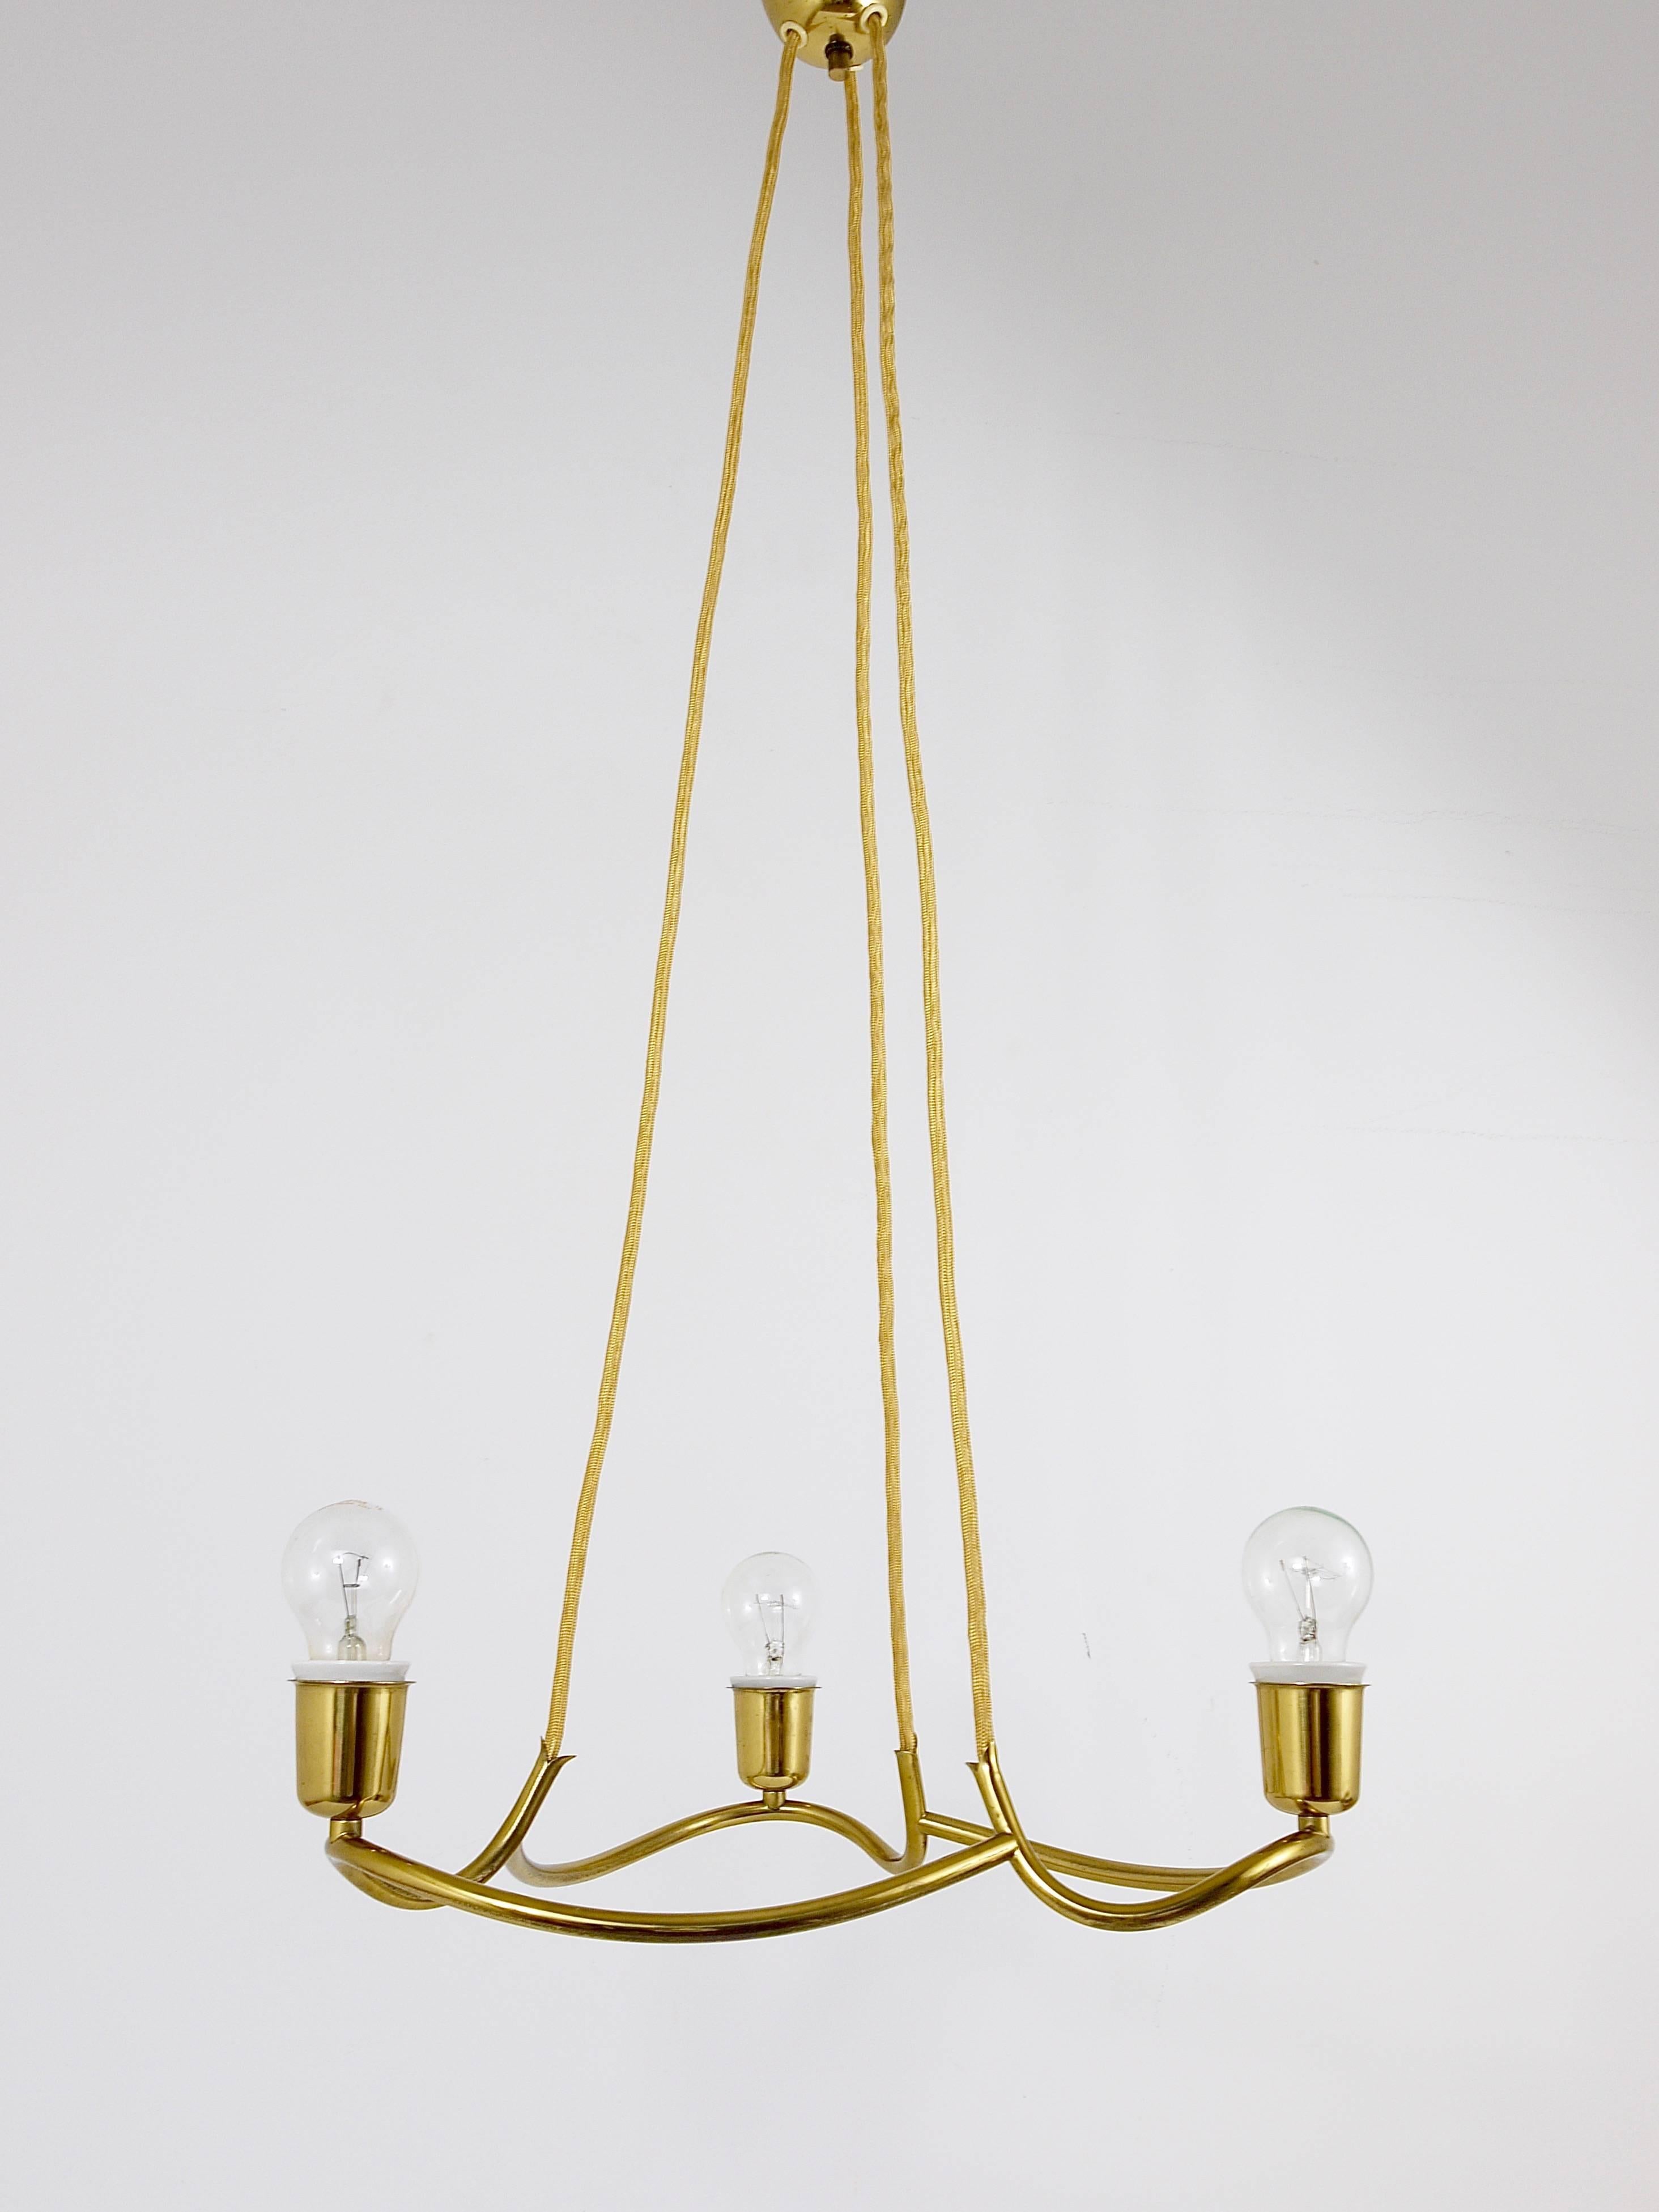 A gorgeous brass chandelier, known as the 'Heron' model, produced by J.T. Kalmar Vienna in the early 1950s. Featuring a gracefully curved brass frame, equipped with three light sources, suspended by golden fabric cords. It's in very good condition,